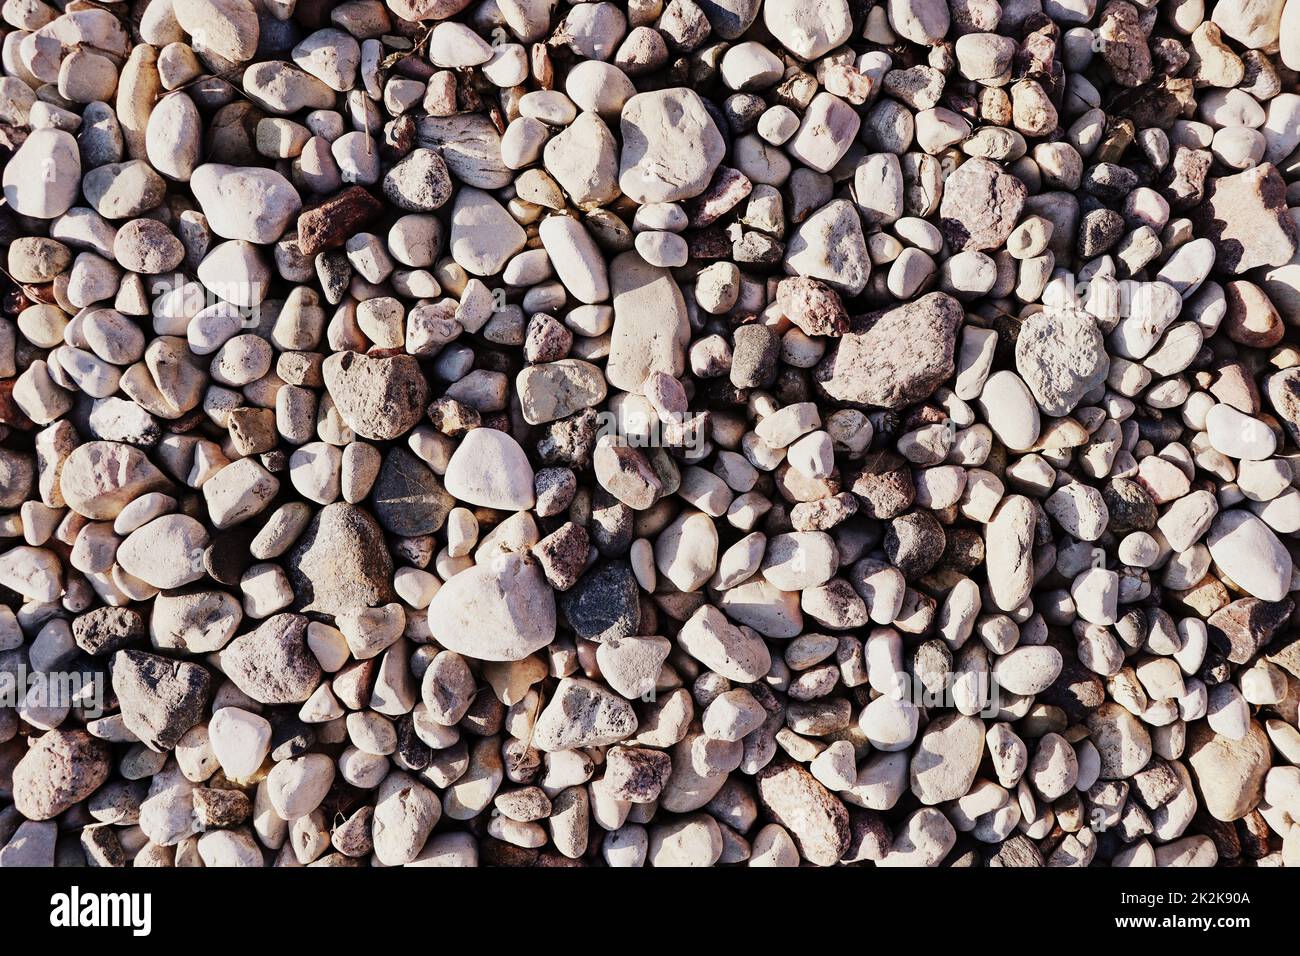 Pebble abstract background with dry round reeble stones Stock Photo